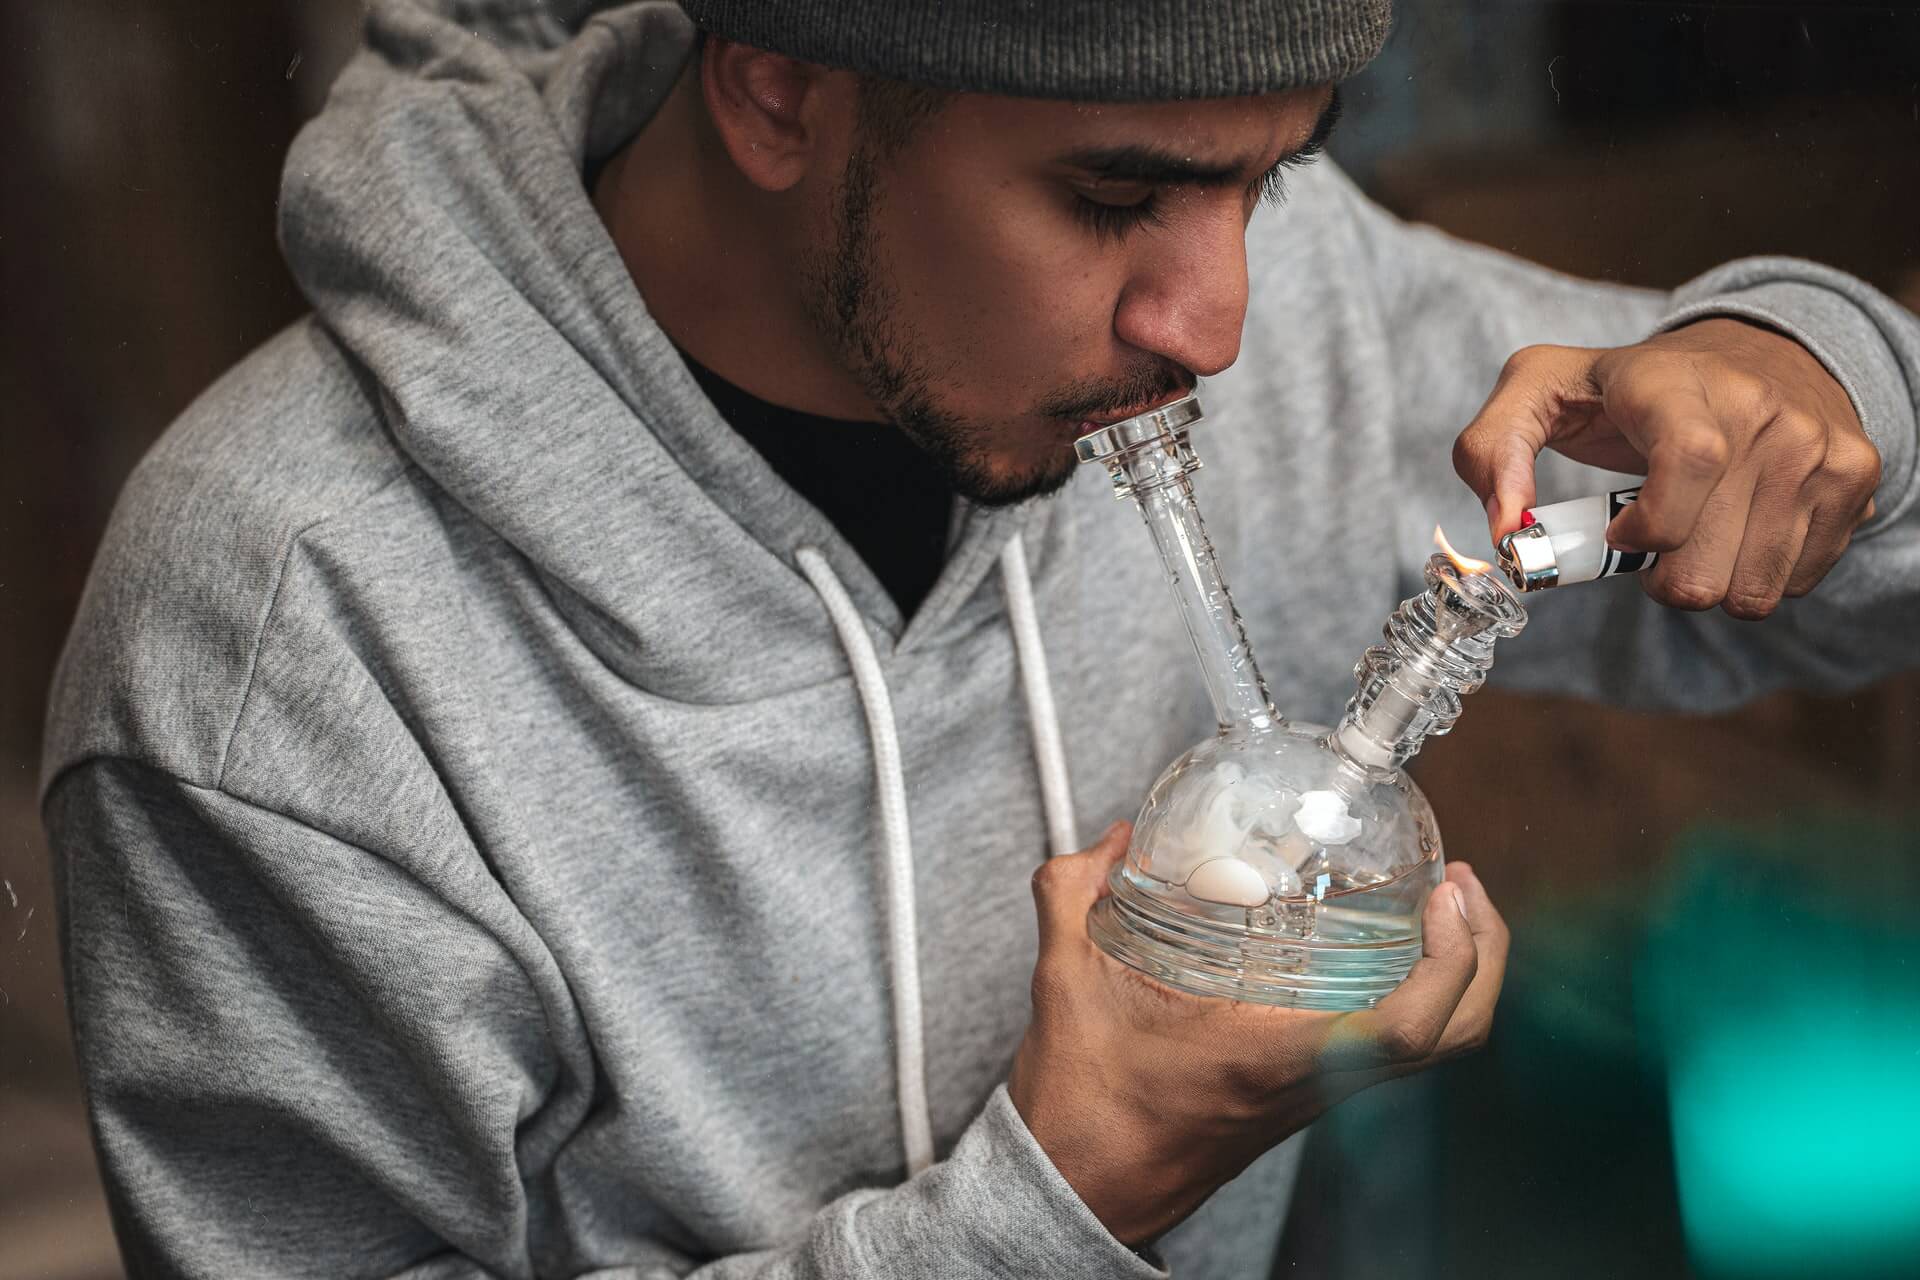 How to clean a bubbler